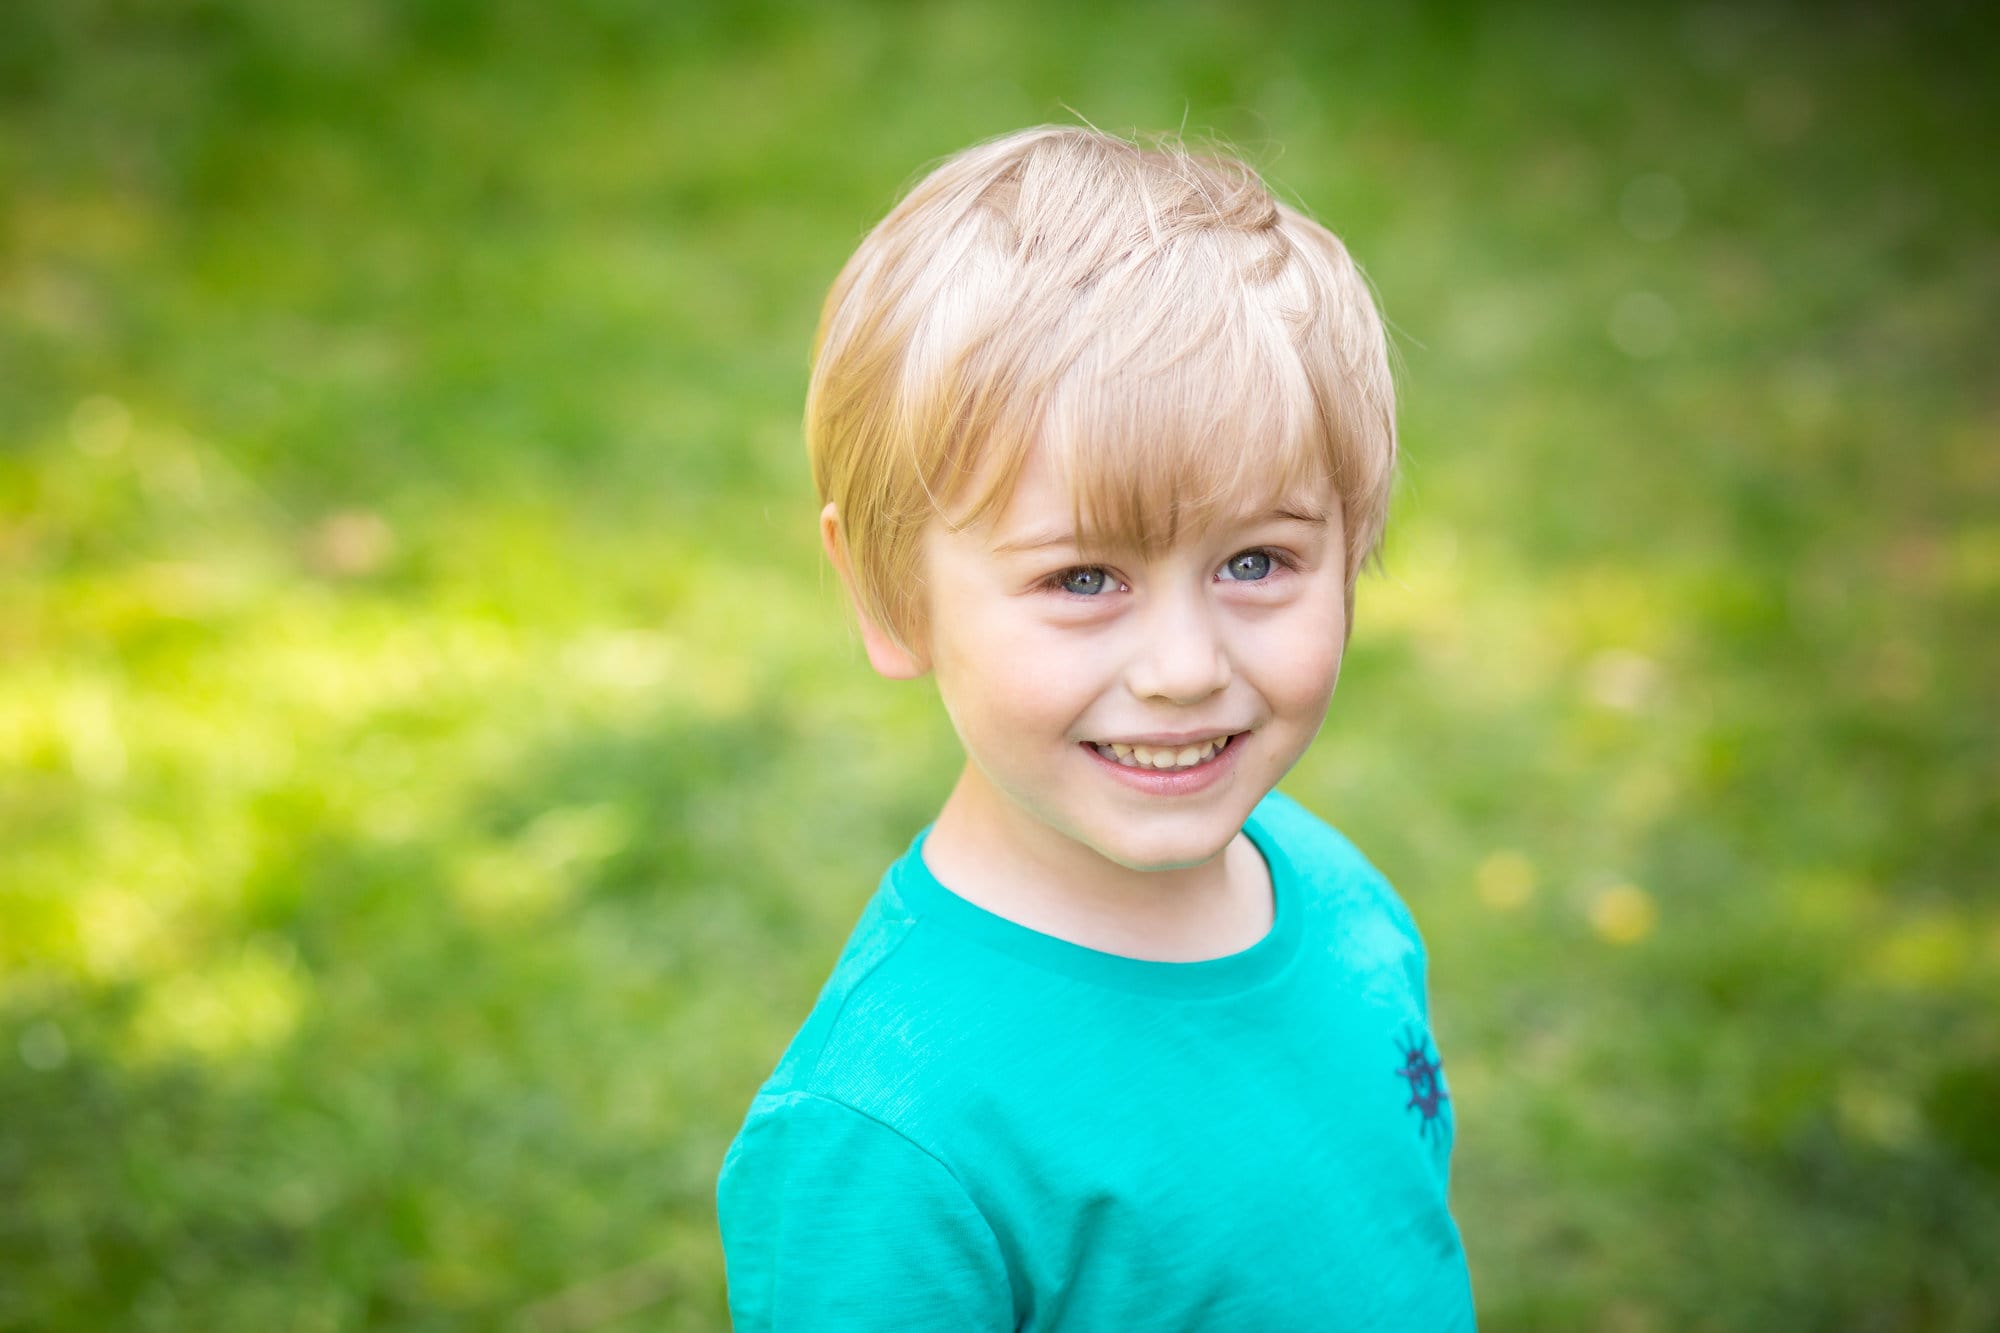 Young boy smiling outside in park in Spring family photoshoot taken by Bromley photographer Tessa Clements